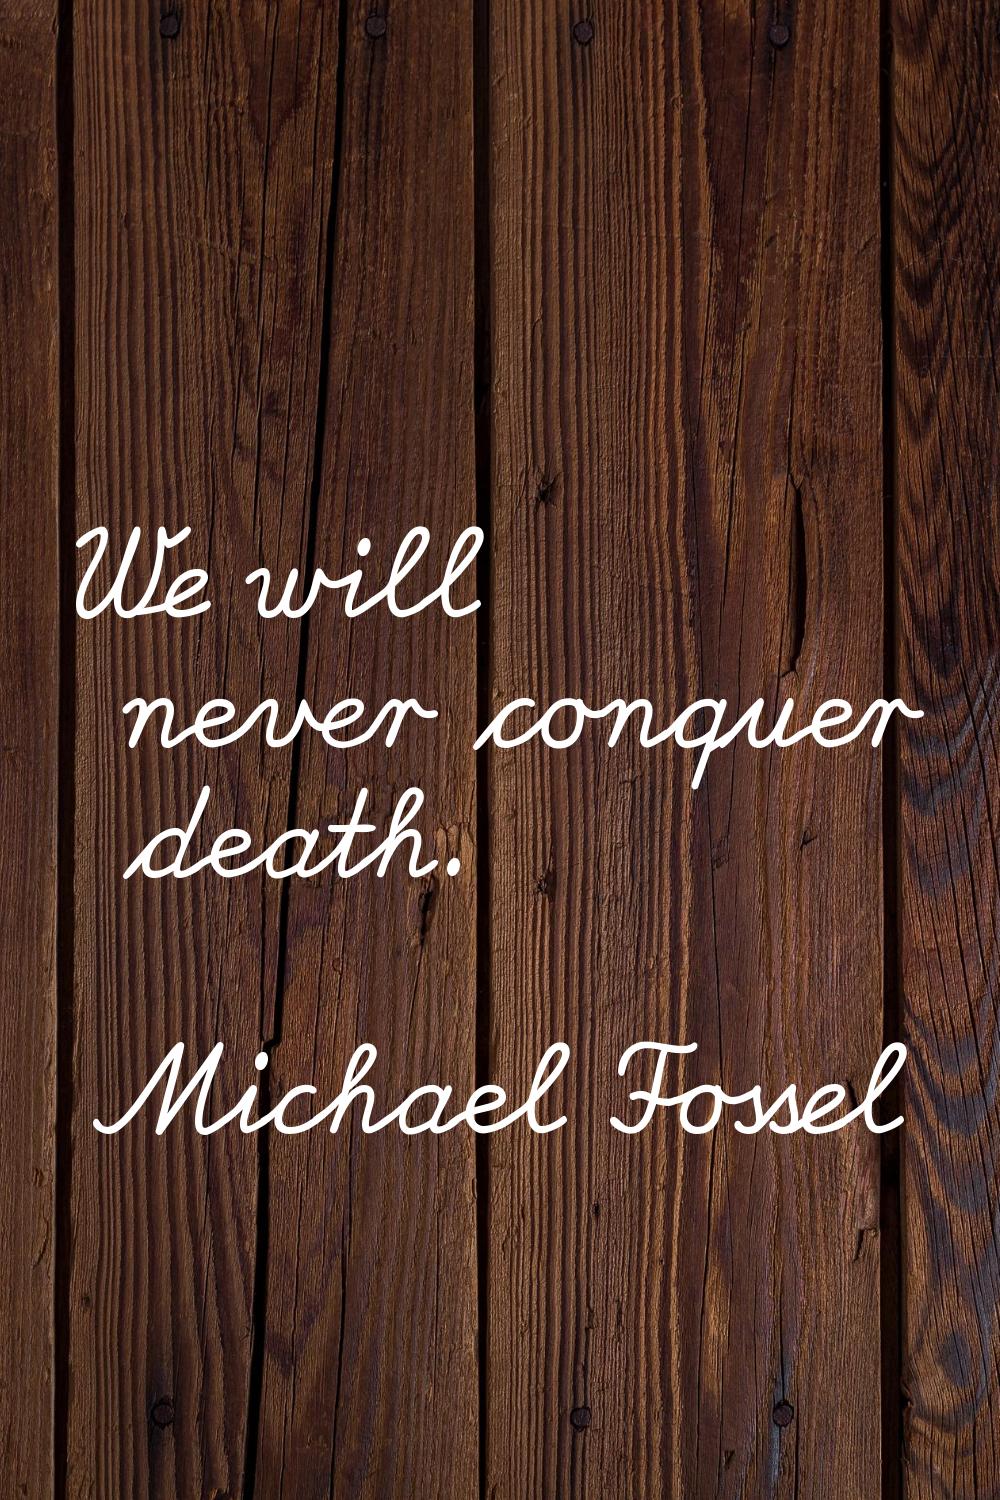 We will never conquer death.